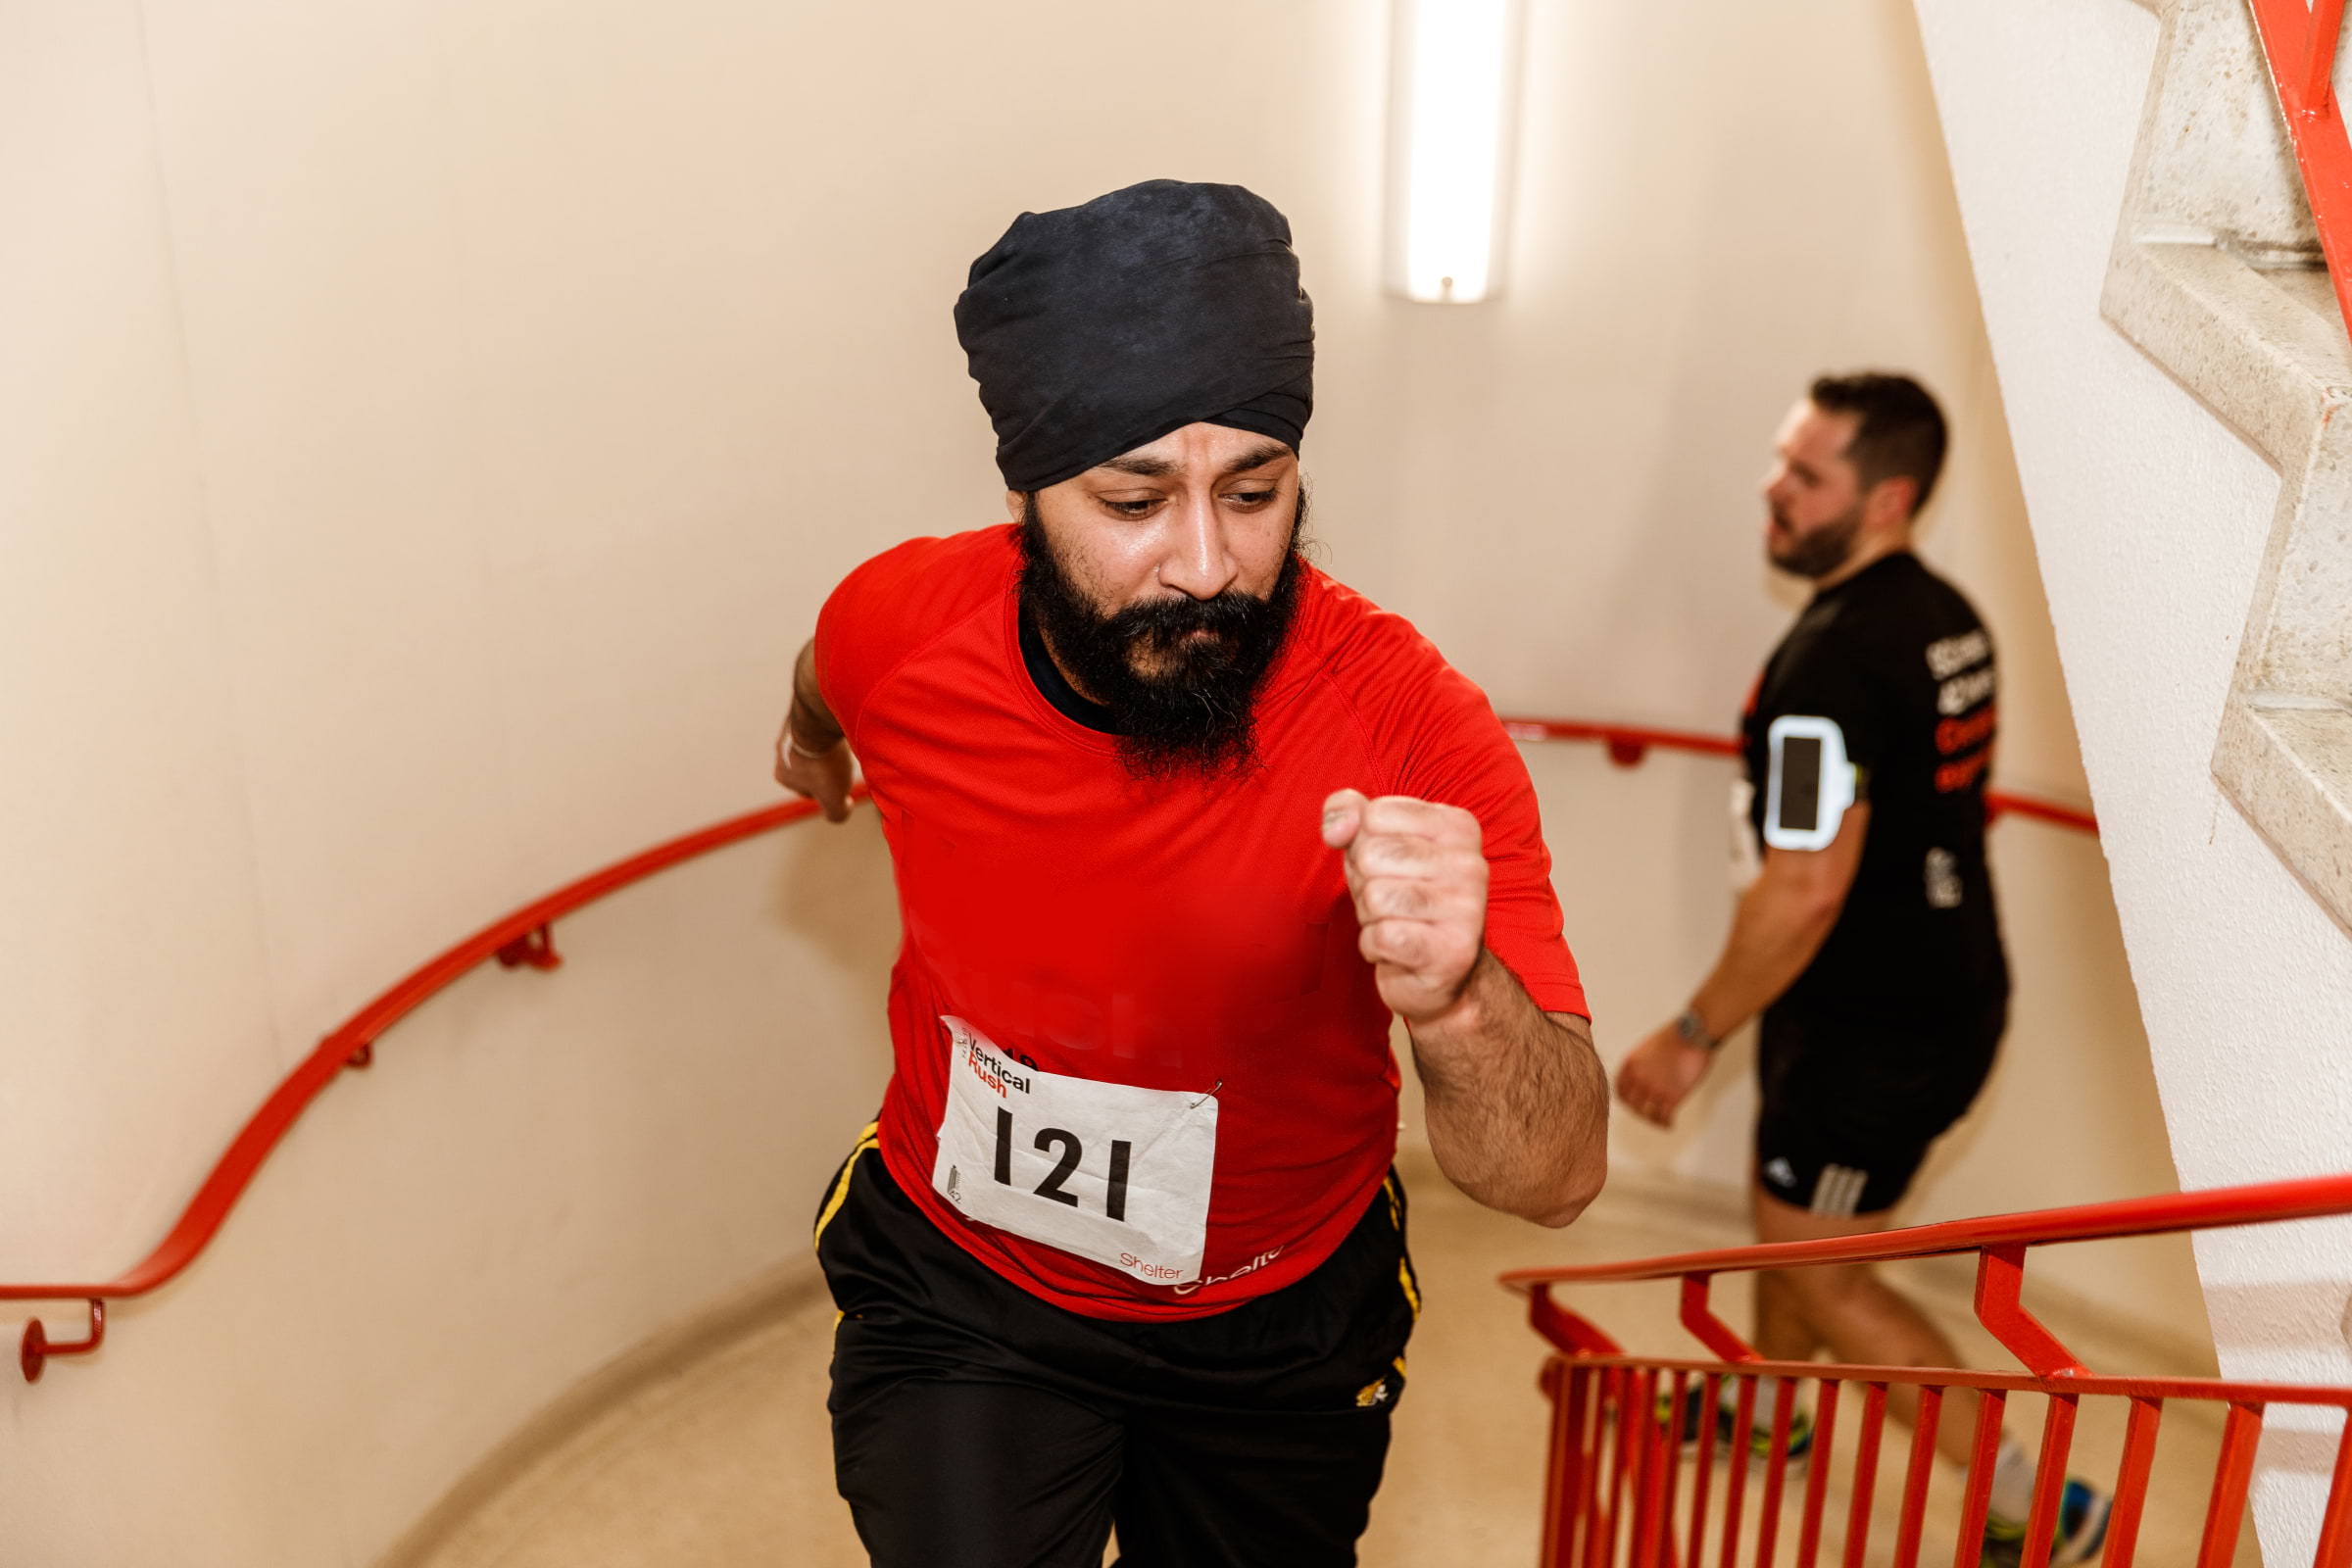 Vertical Rush 2024: Challenge yourself to help Shelter fight homelessness